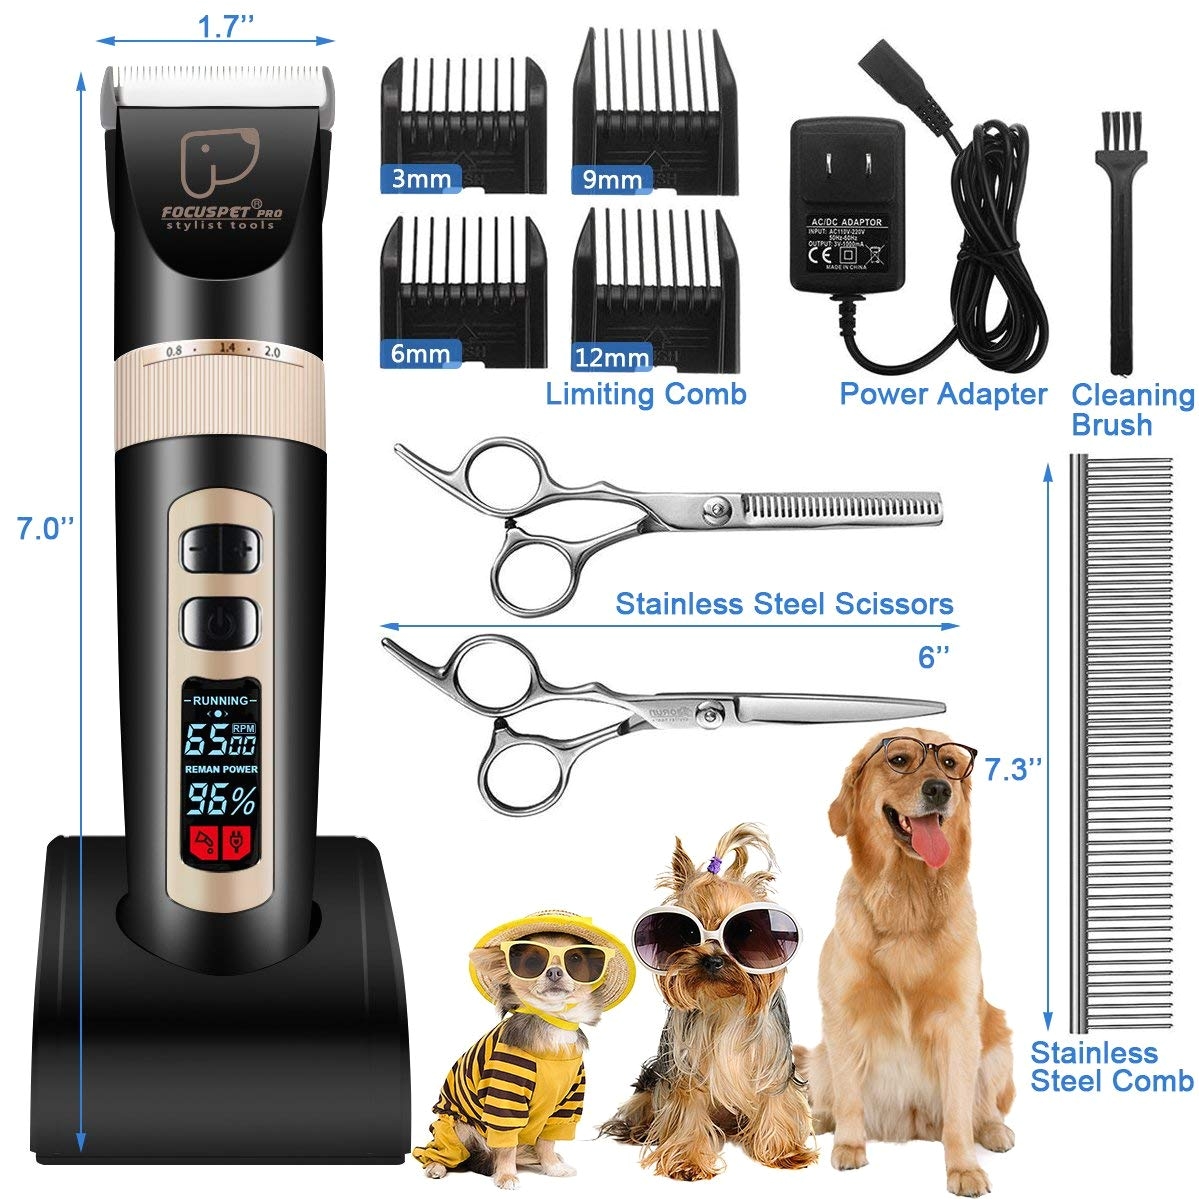 amazon com focuspet dog grooming clippers professional 3 speed low noise rechargeable cordless electric dog clippers pet grooming clipper kit dogs cats